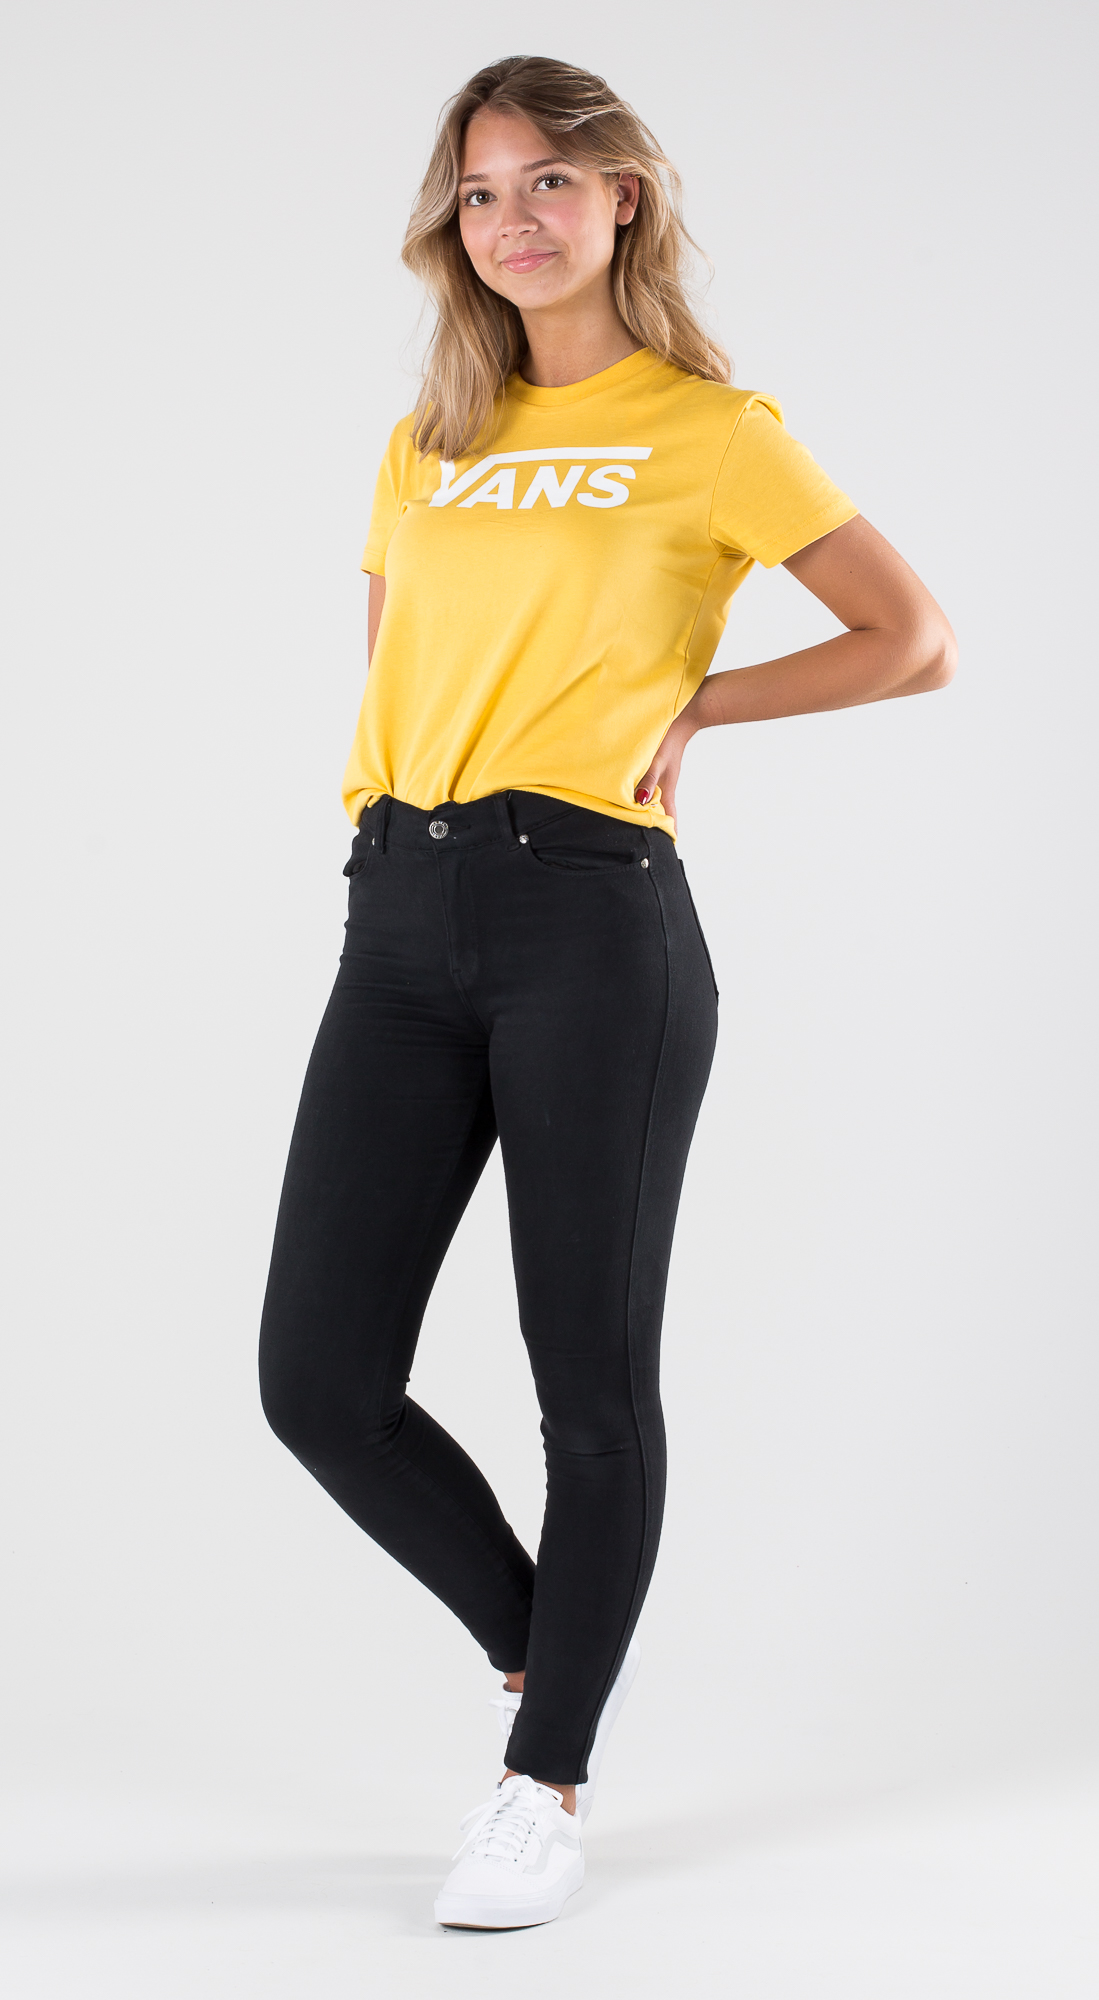 vans yellow outfit